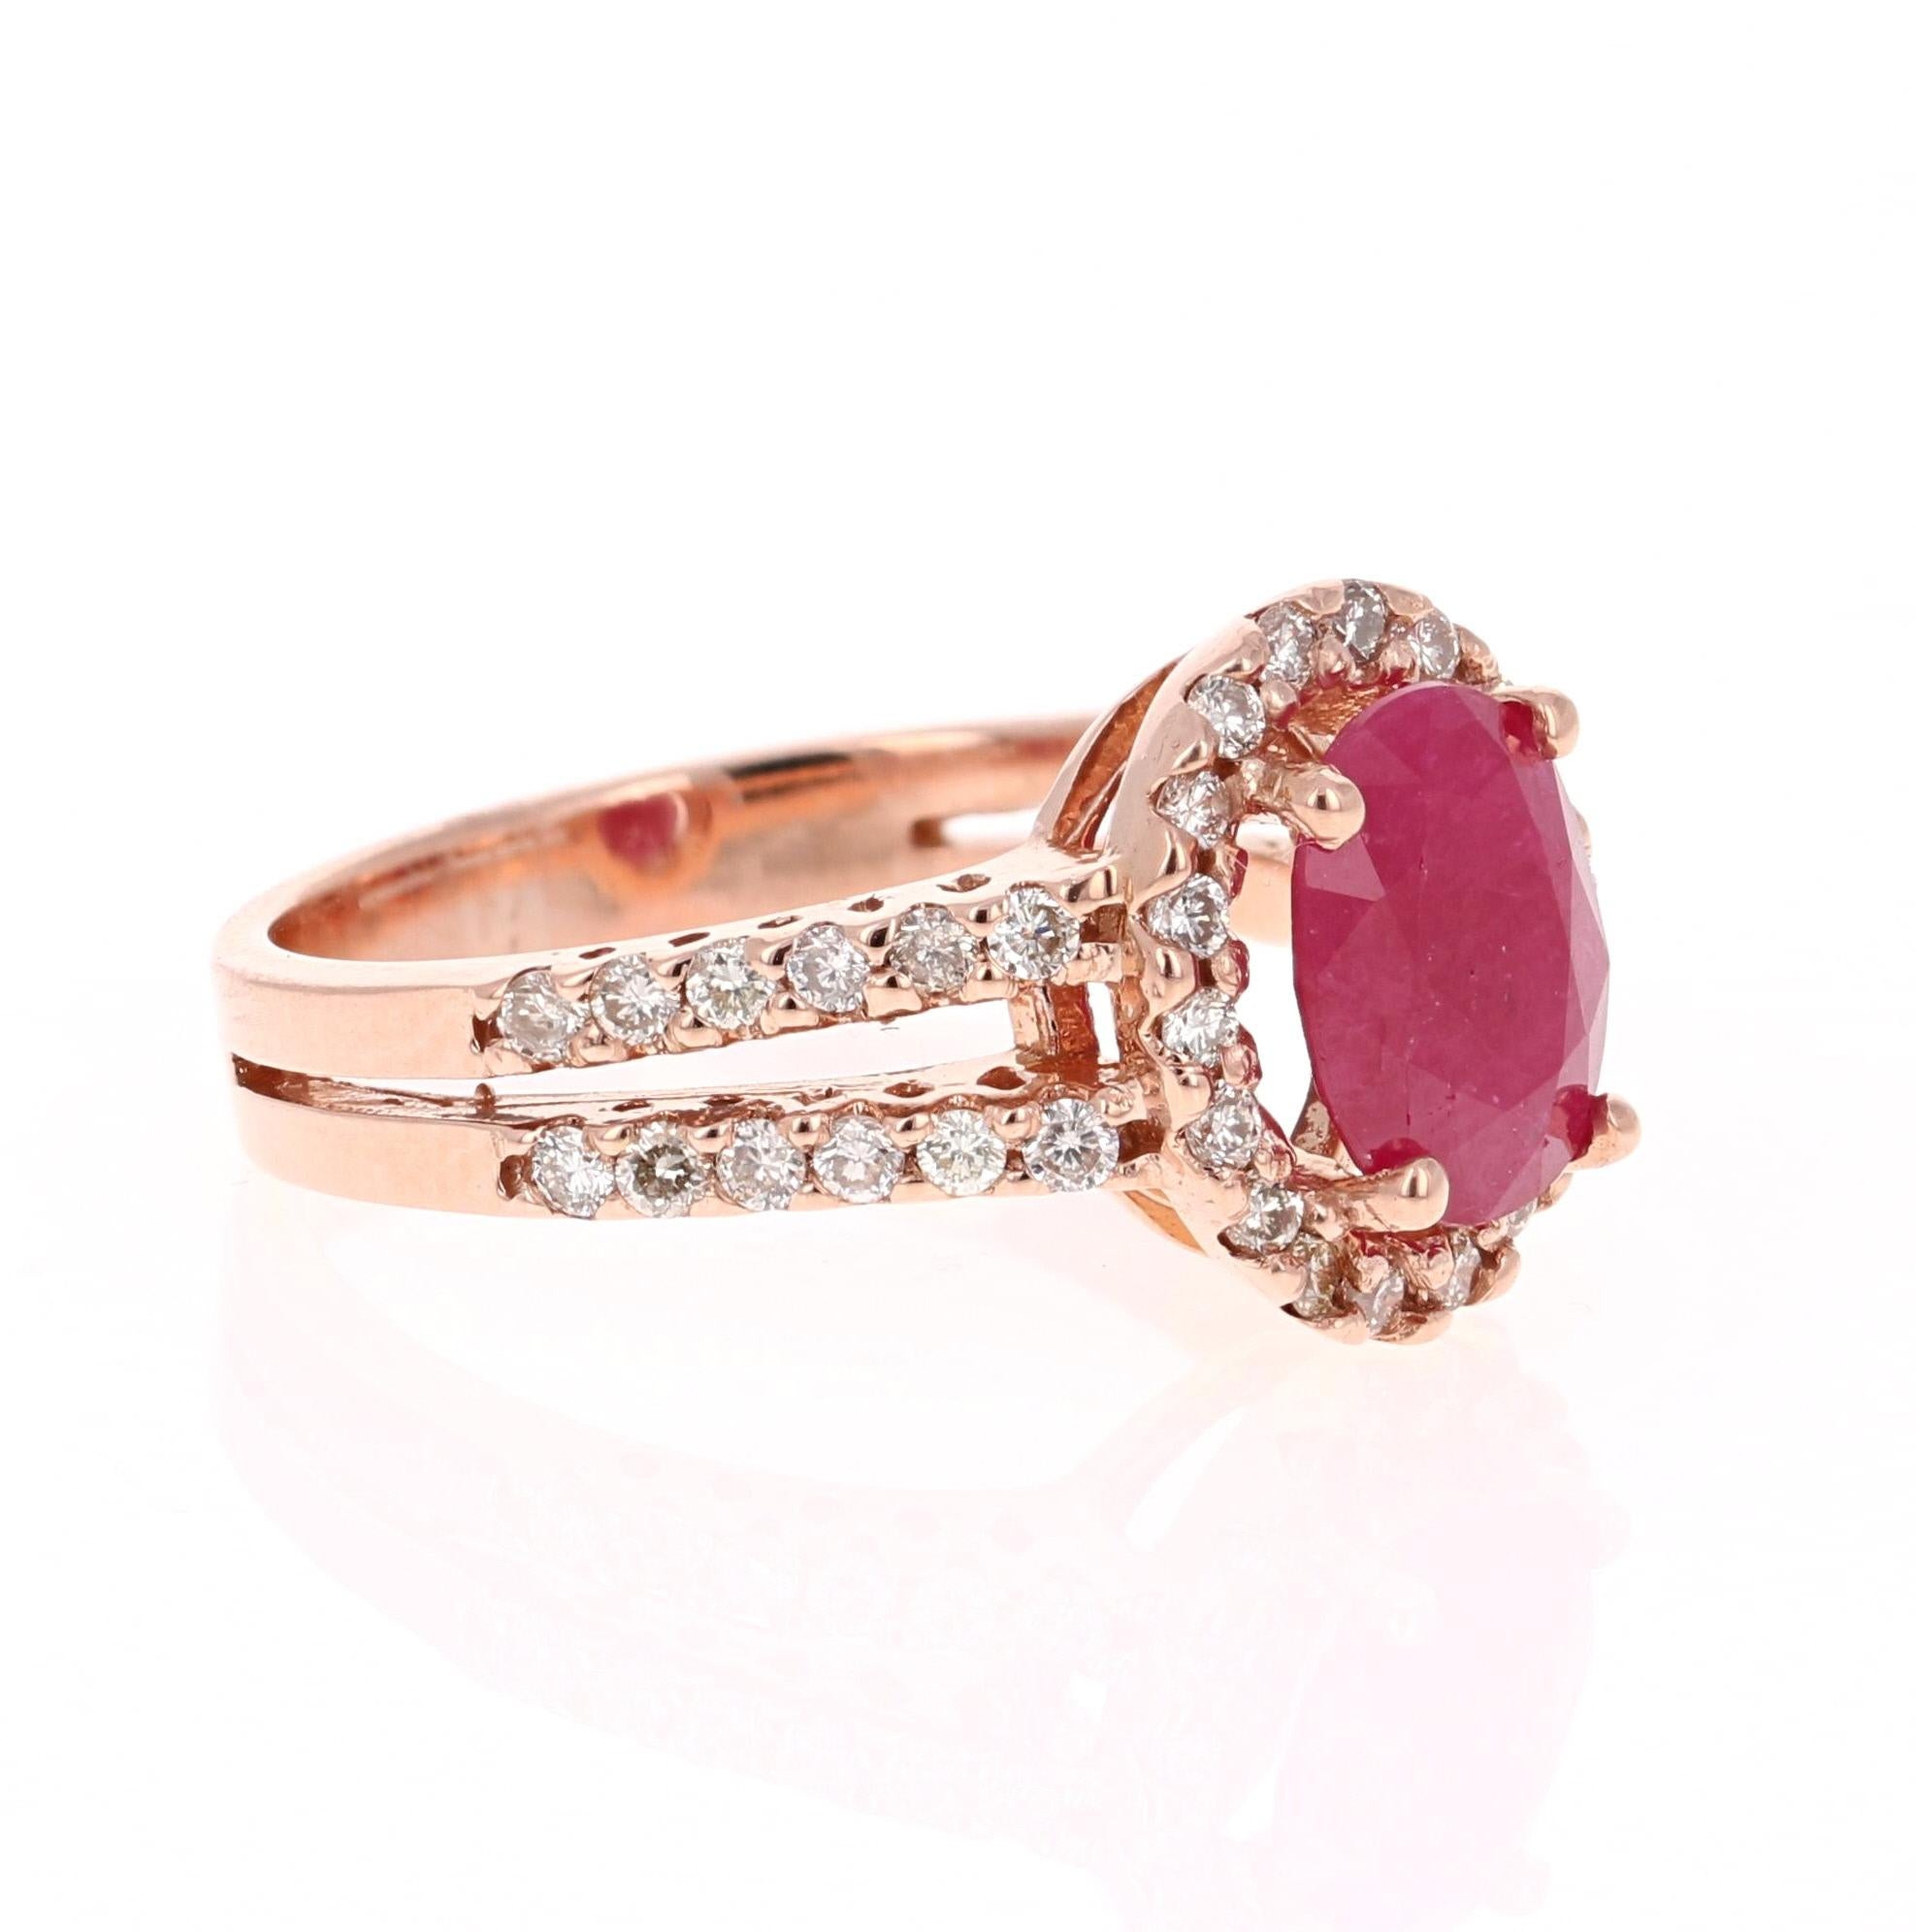 This ring is truly a beauty and can easily be transformed into a unique engagement or bridal ring!
There is a Oval Cut Ruby set in the center of the ring that weighs 1.95 carats.  There are also 42 Round Cut Diamonds that weigh 0.59 carats (Clarity: